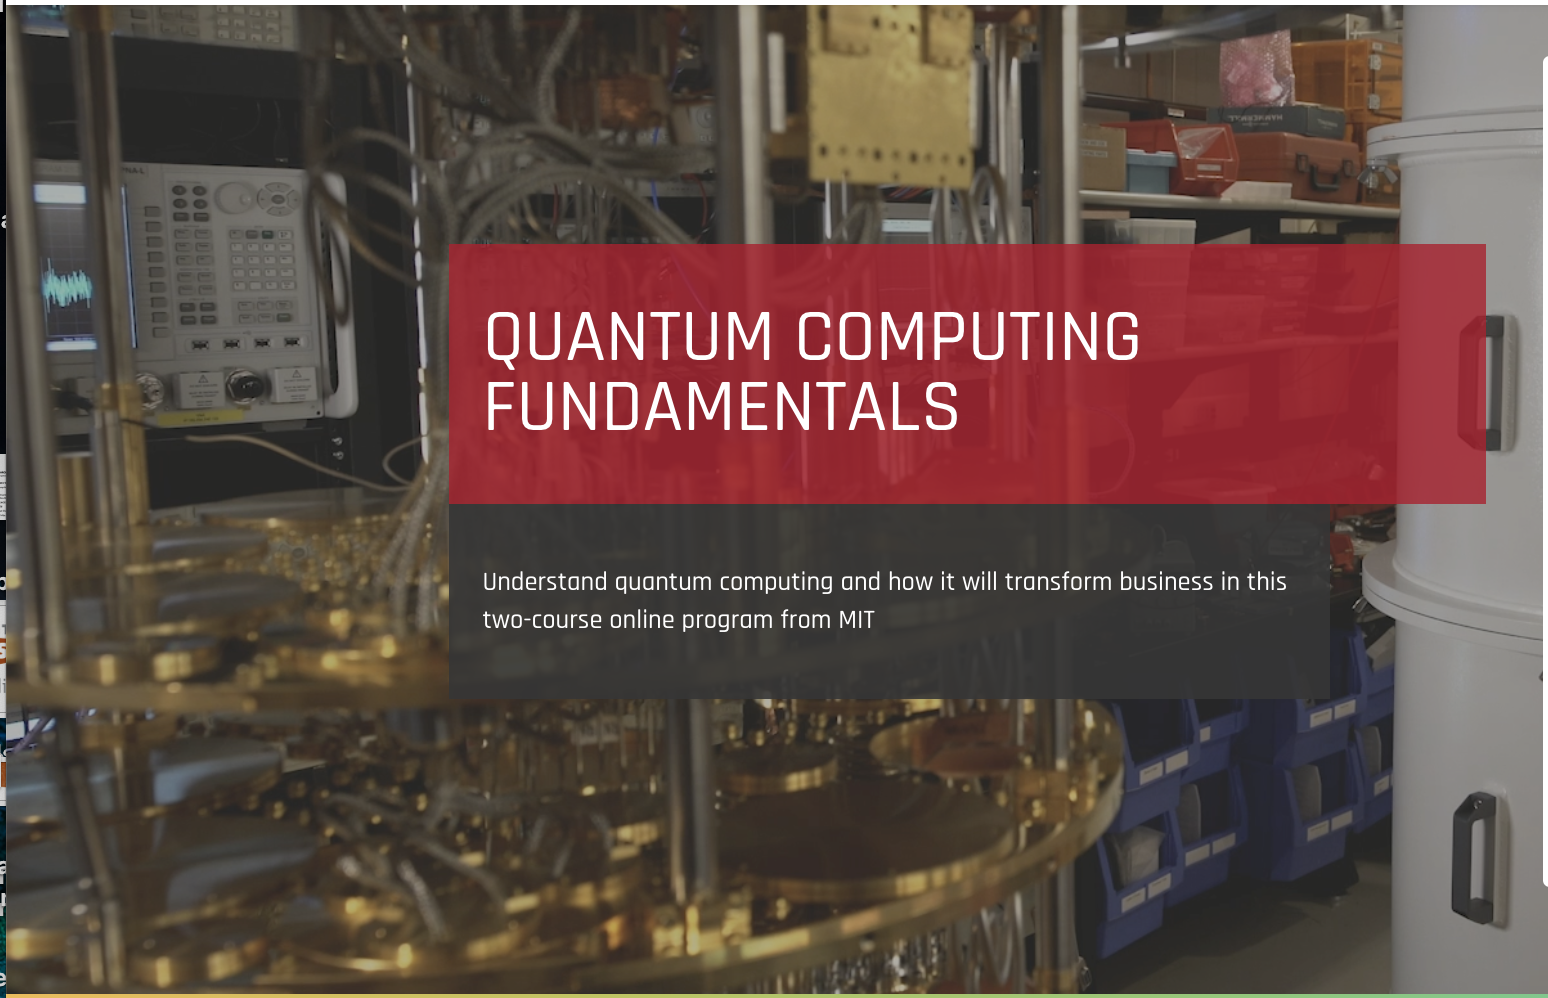 Text reads "MIT Quantum Computing" in front of a computer system